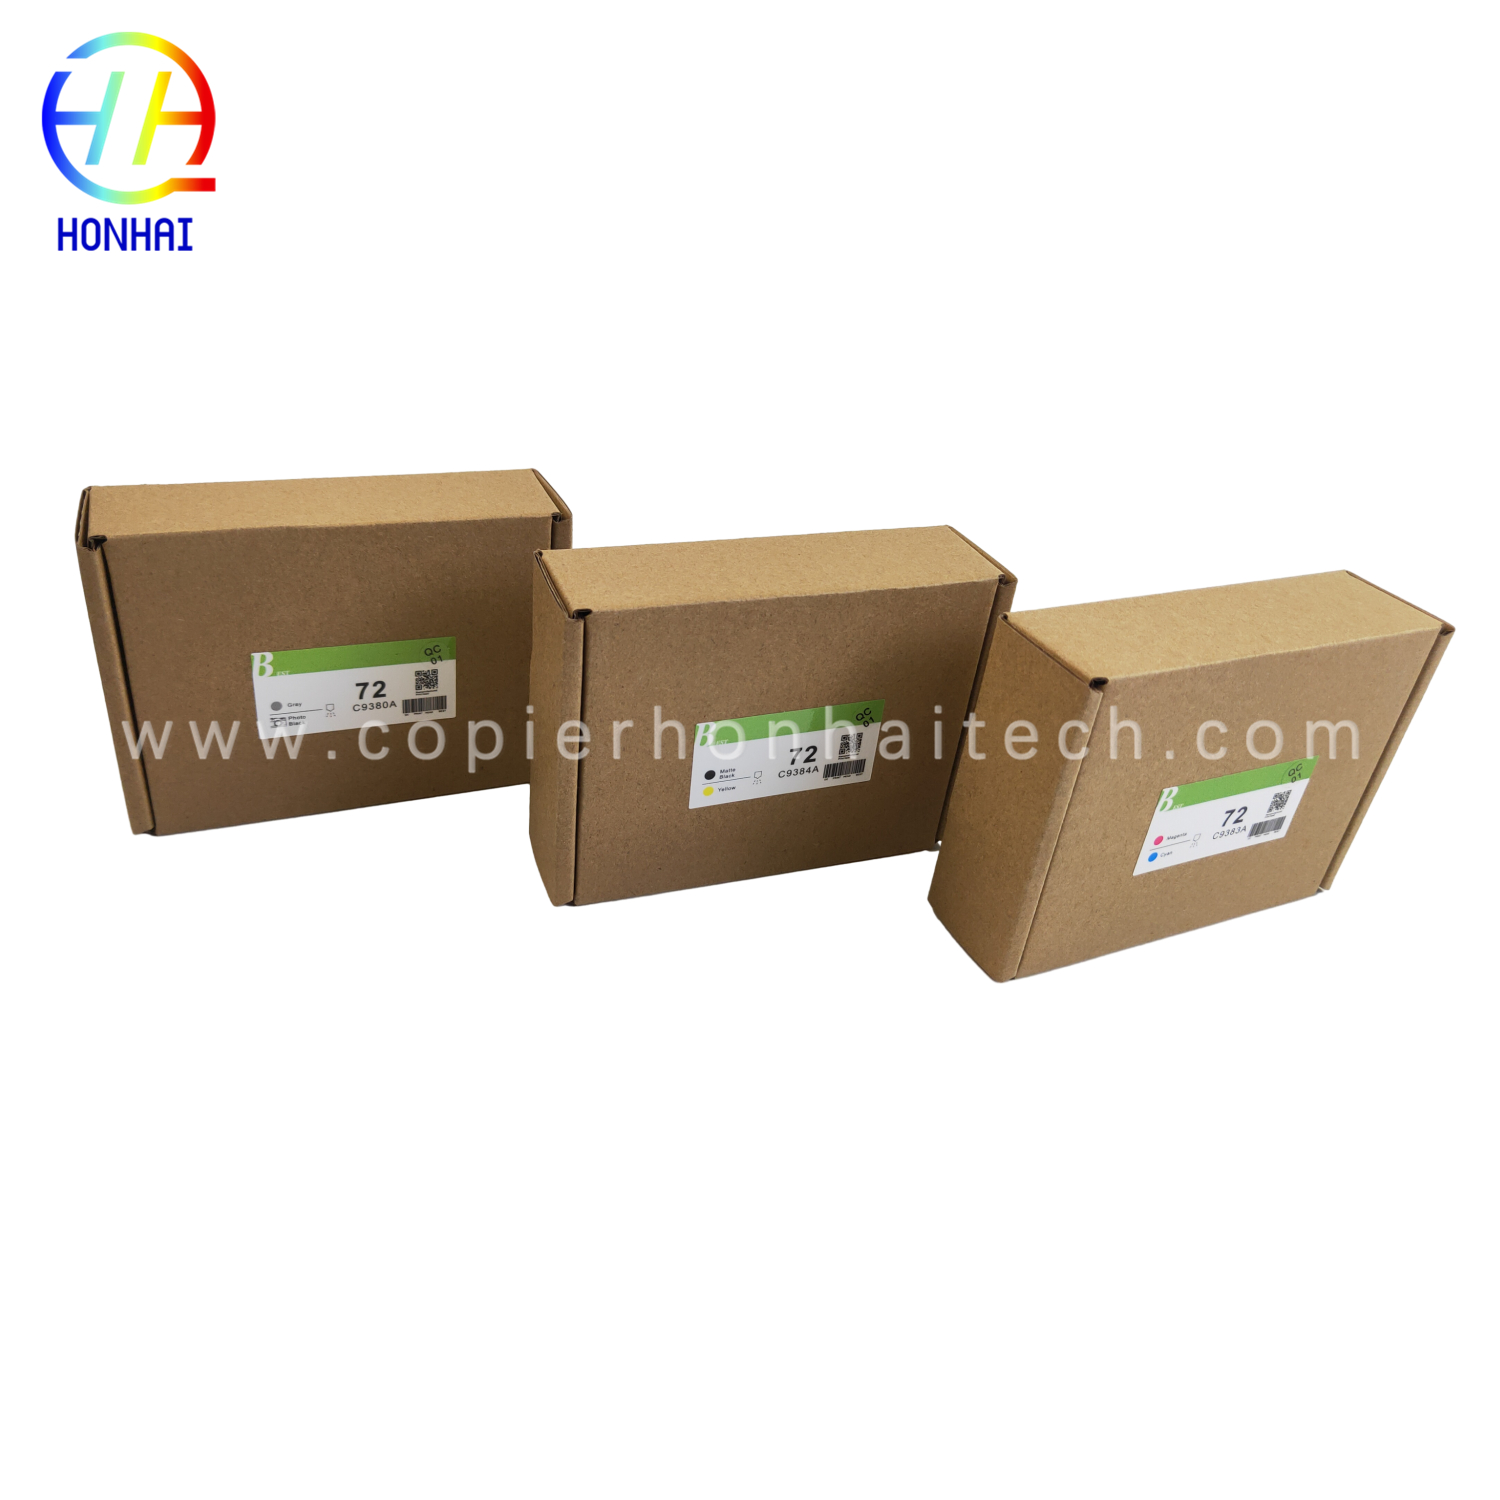 https://www.copierhonhaitech.com/printing-head-for-hp-72-c9380a-designjet-t2300-gray-and-photo-black-c9383a-magenta-and-cyan-c9384a-matte-black-and-yellow-product/